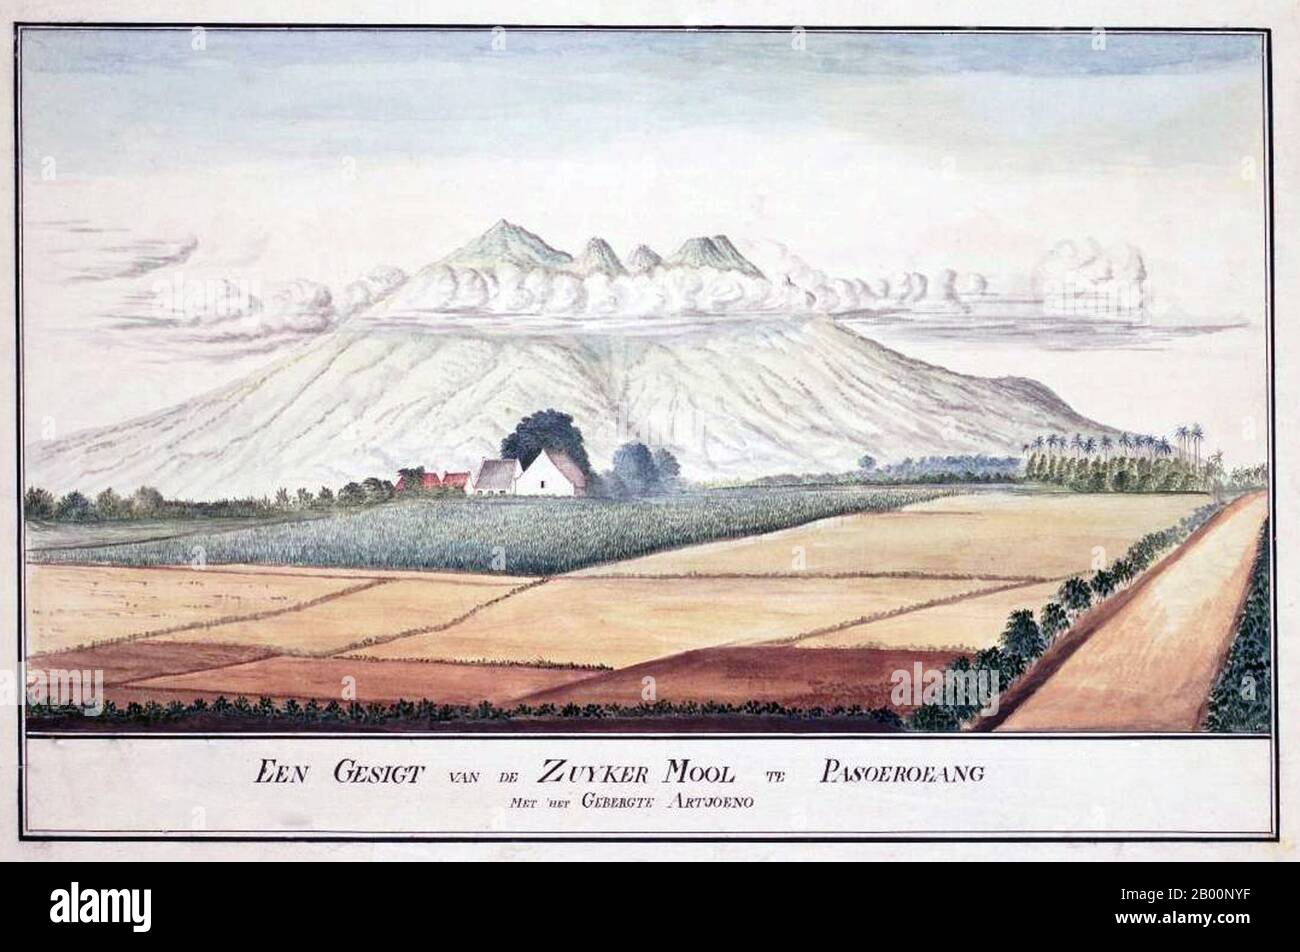 Indonesia: Artjoeno Mountains near Pasoeroean, eastern Java. Watercolour painting by an unknown artist, late 18th century.  Pasuruan or Pasoeroean is a city in eastern Java, Indonesia, on the Madura Strait. Established by the Dutch in 1707, it remains an active seaport. It has shipyards, sugar and rice mills, and various factories. Stock Photo